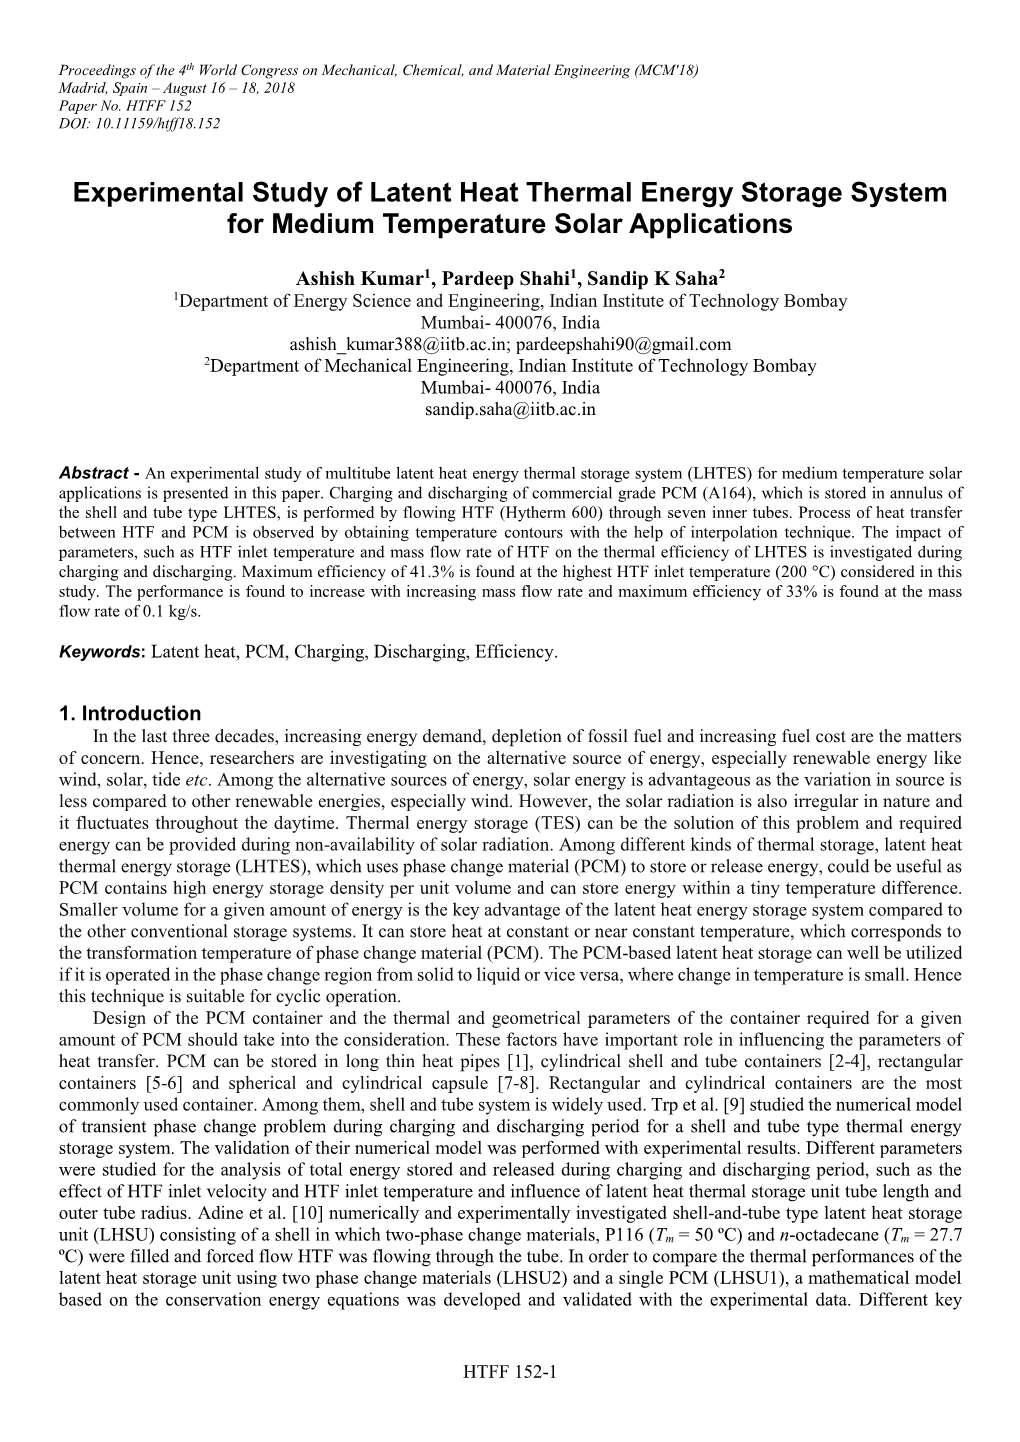 Experimental Study of Latent Heat Thermal Energy Storage System for Medium Temperature Solar Applications